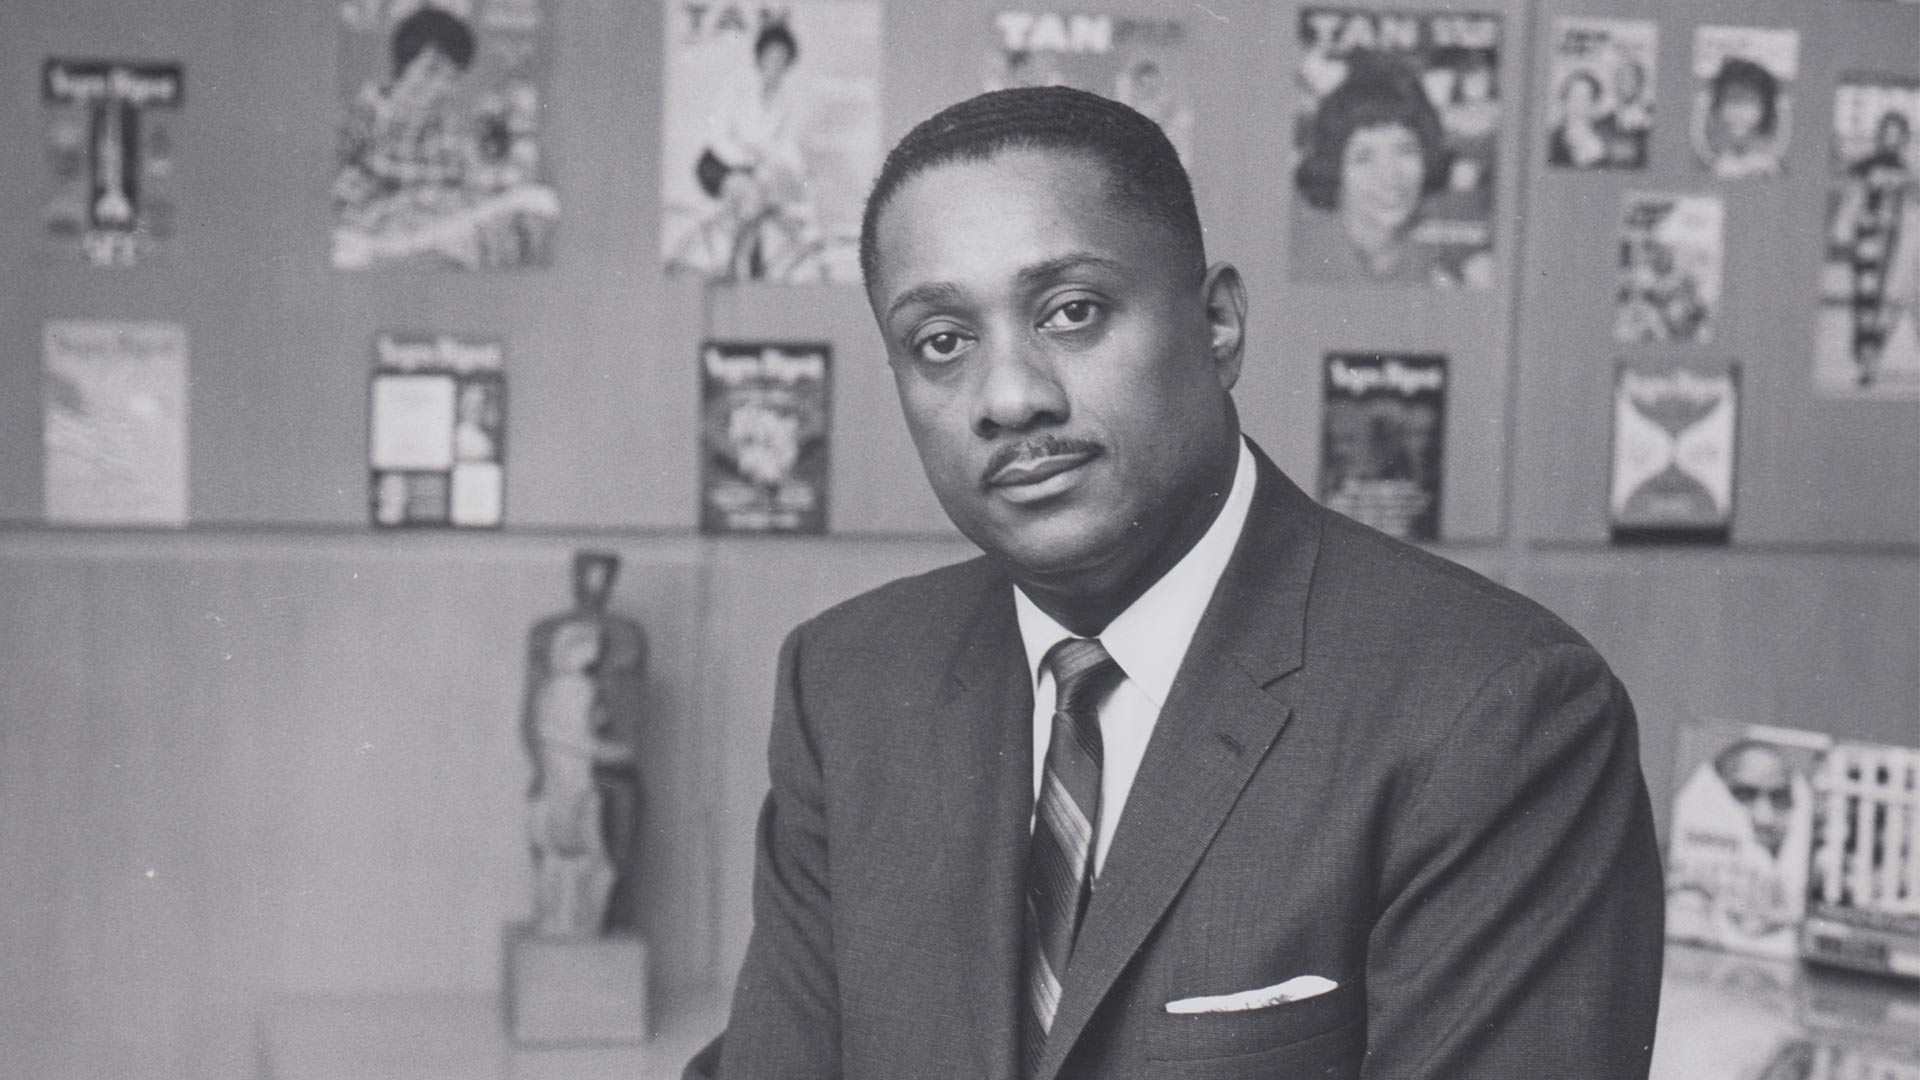 John H. Johnson, founder of Johnson Publishing Company, whose Ebony and Jet were among the most influential black publications of the 20th century.